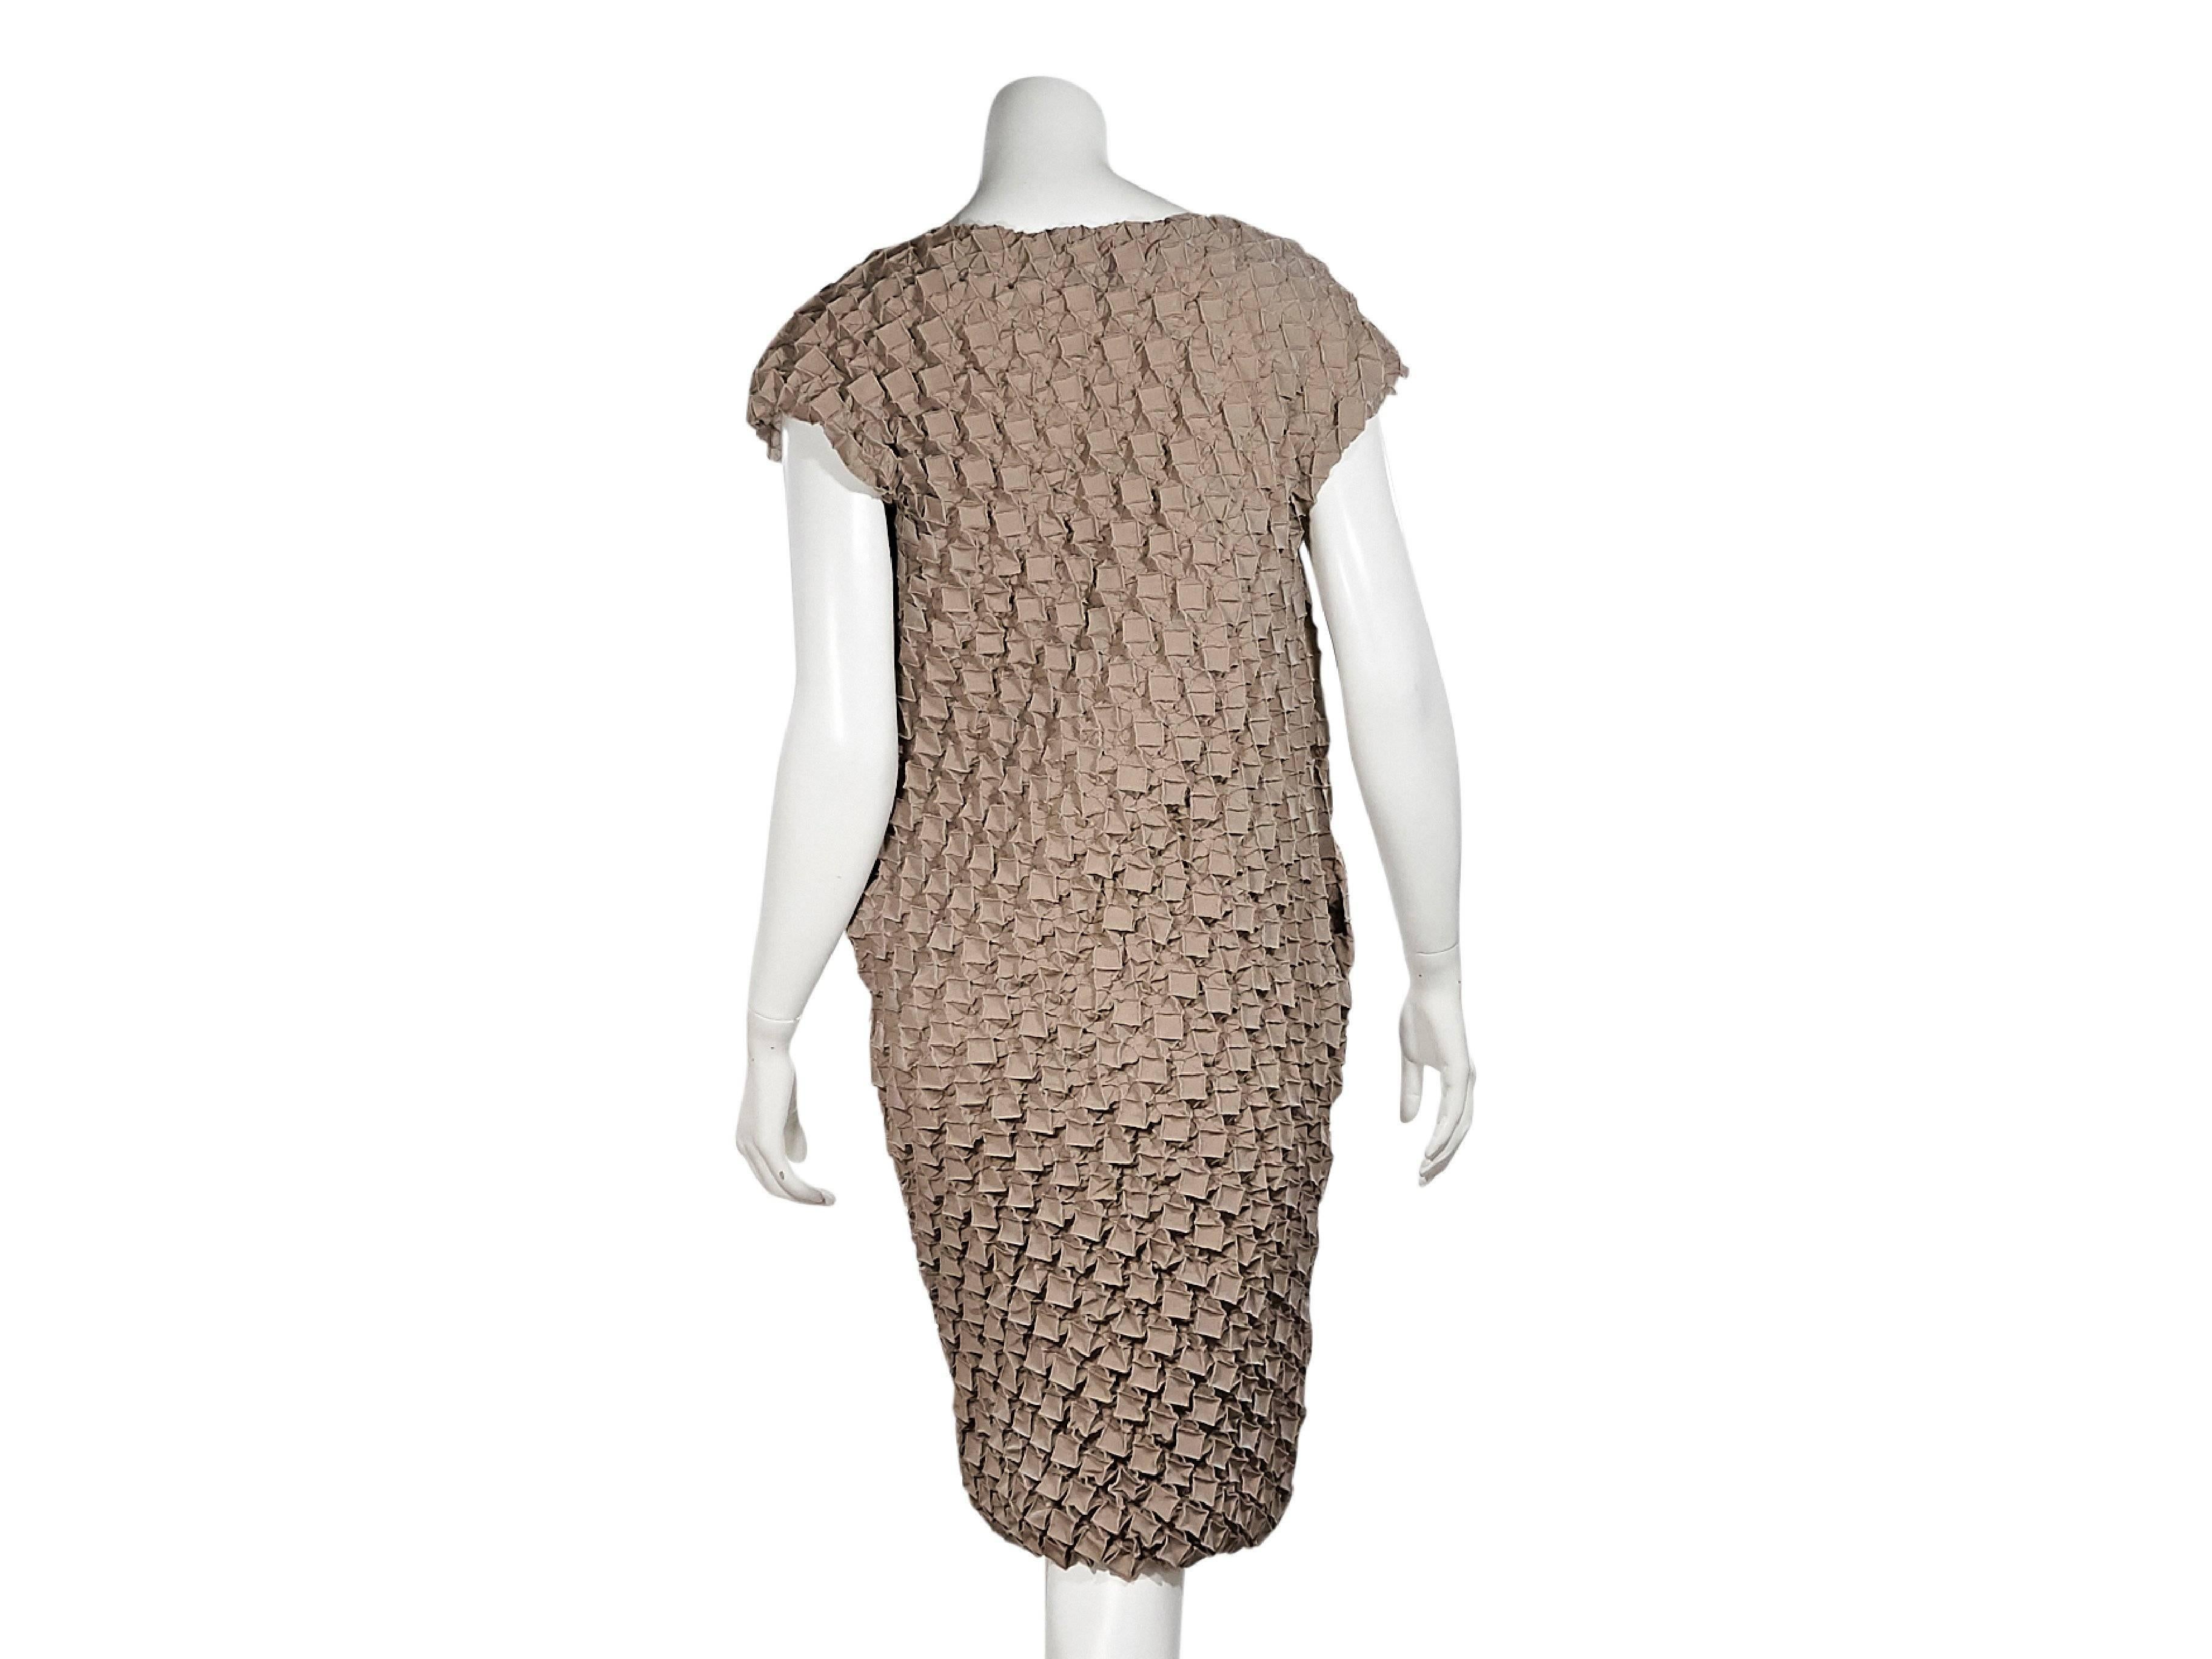 Product details:  Tan textured shift dress by Issey Miyake.  Short dolman sleeves.  Pullover style.  44